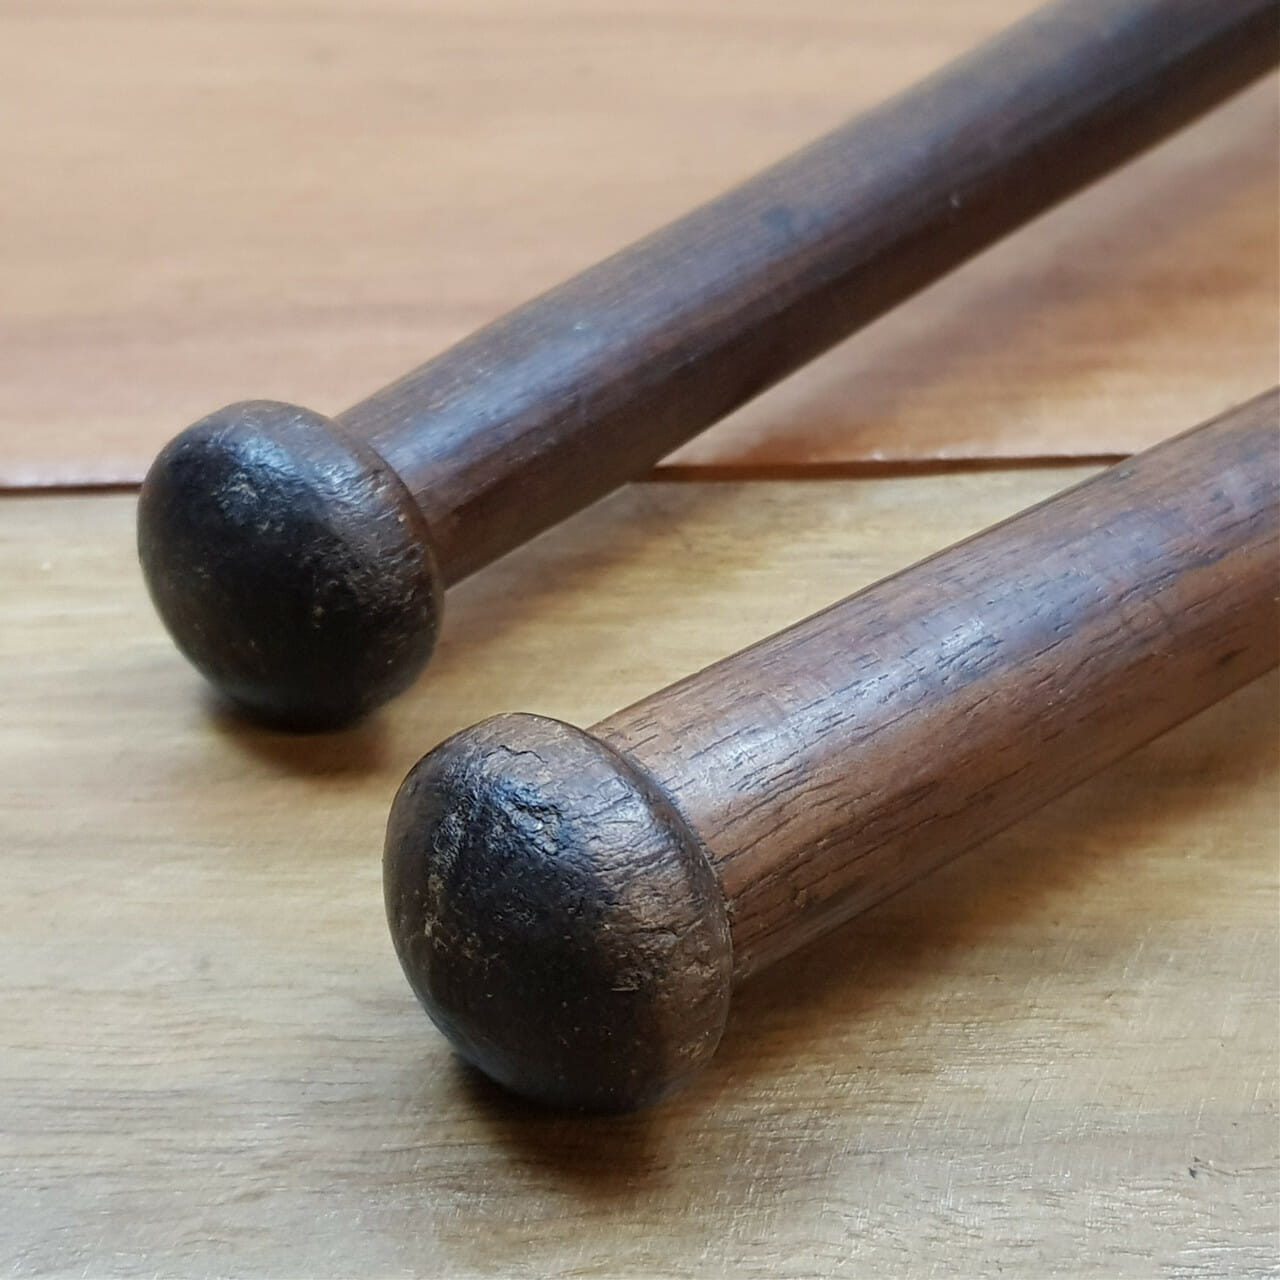 Pair Of Vintage Exercise Batons 50493 Monty S